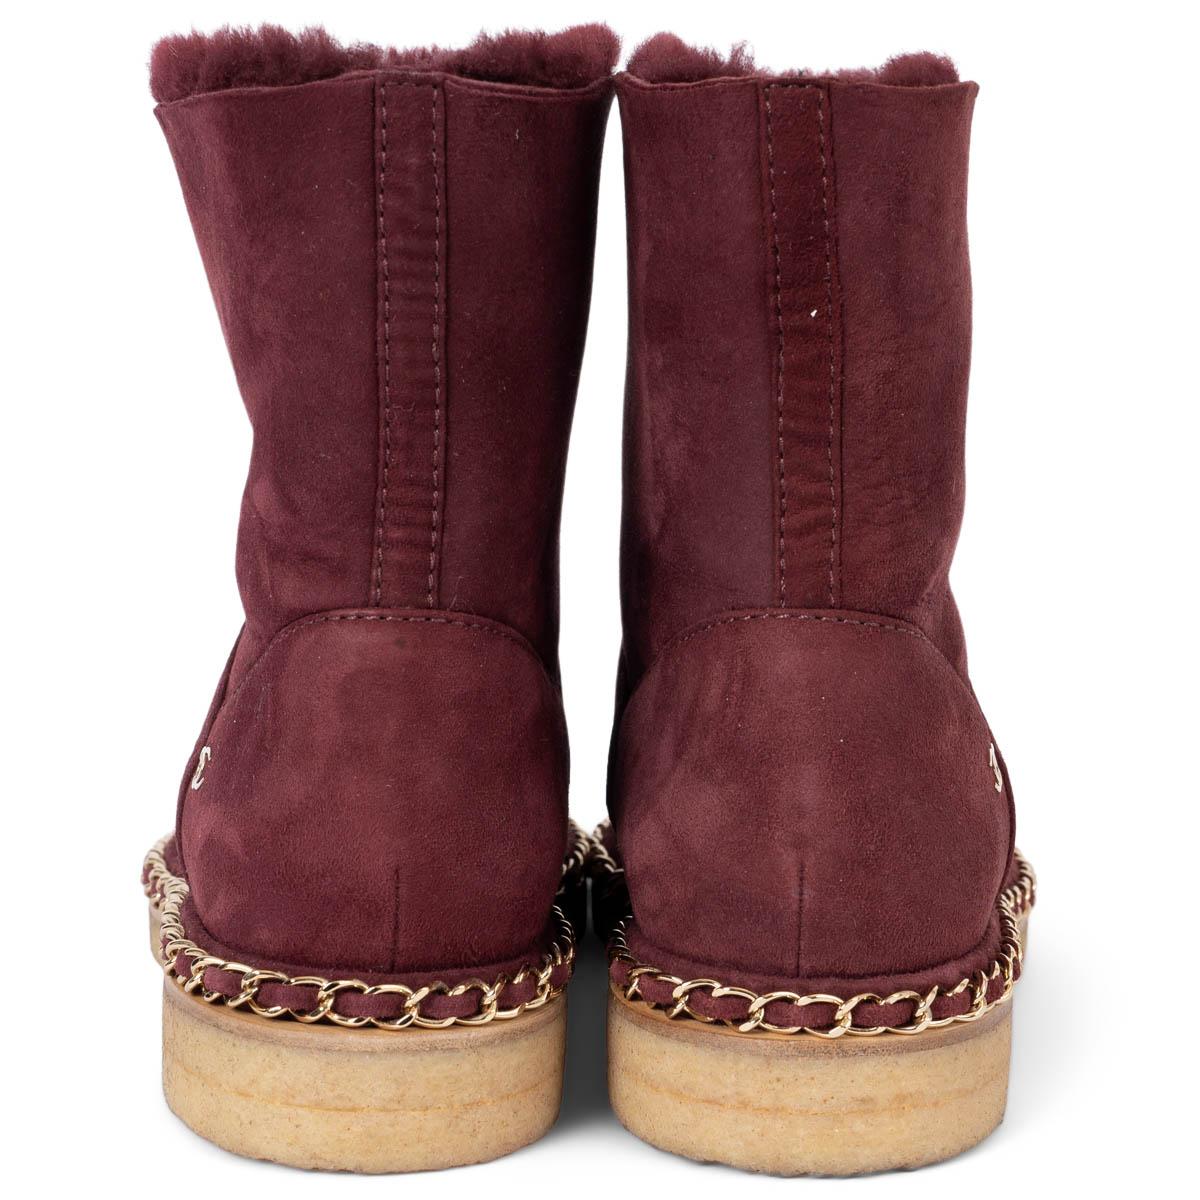 CHANEL burgundy suede 2019 19B SHEARLING LINED Boots Shoes 37 For Sale 1